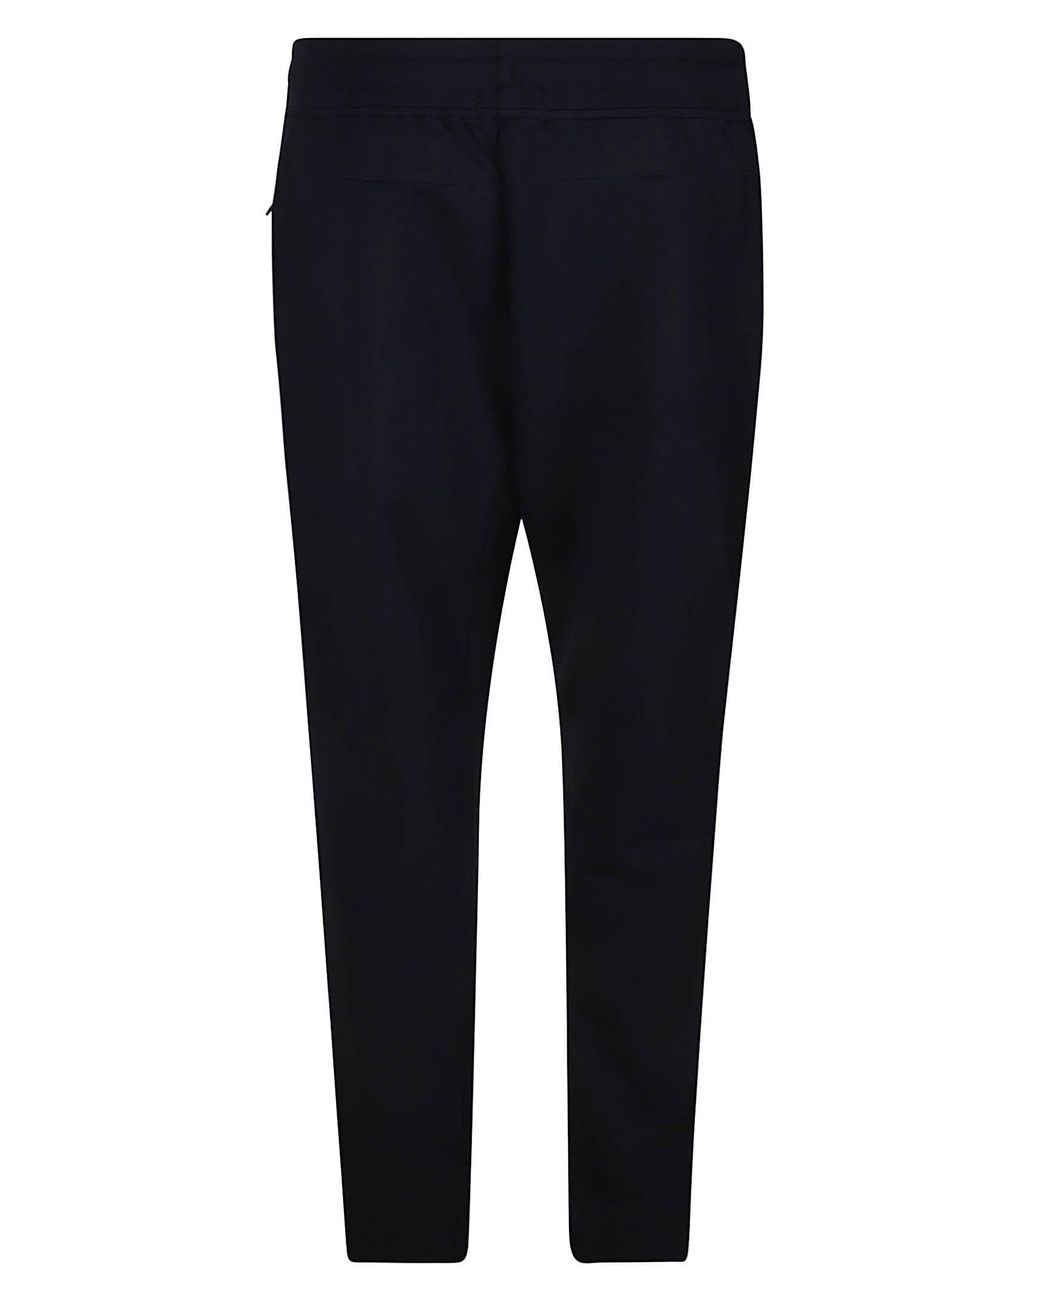 Buy Men Fitted Track Pants Online at Best Prices in India - JioMart.